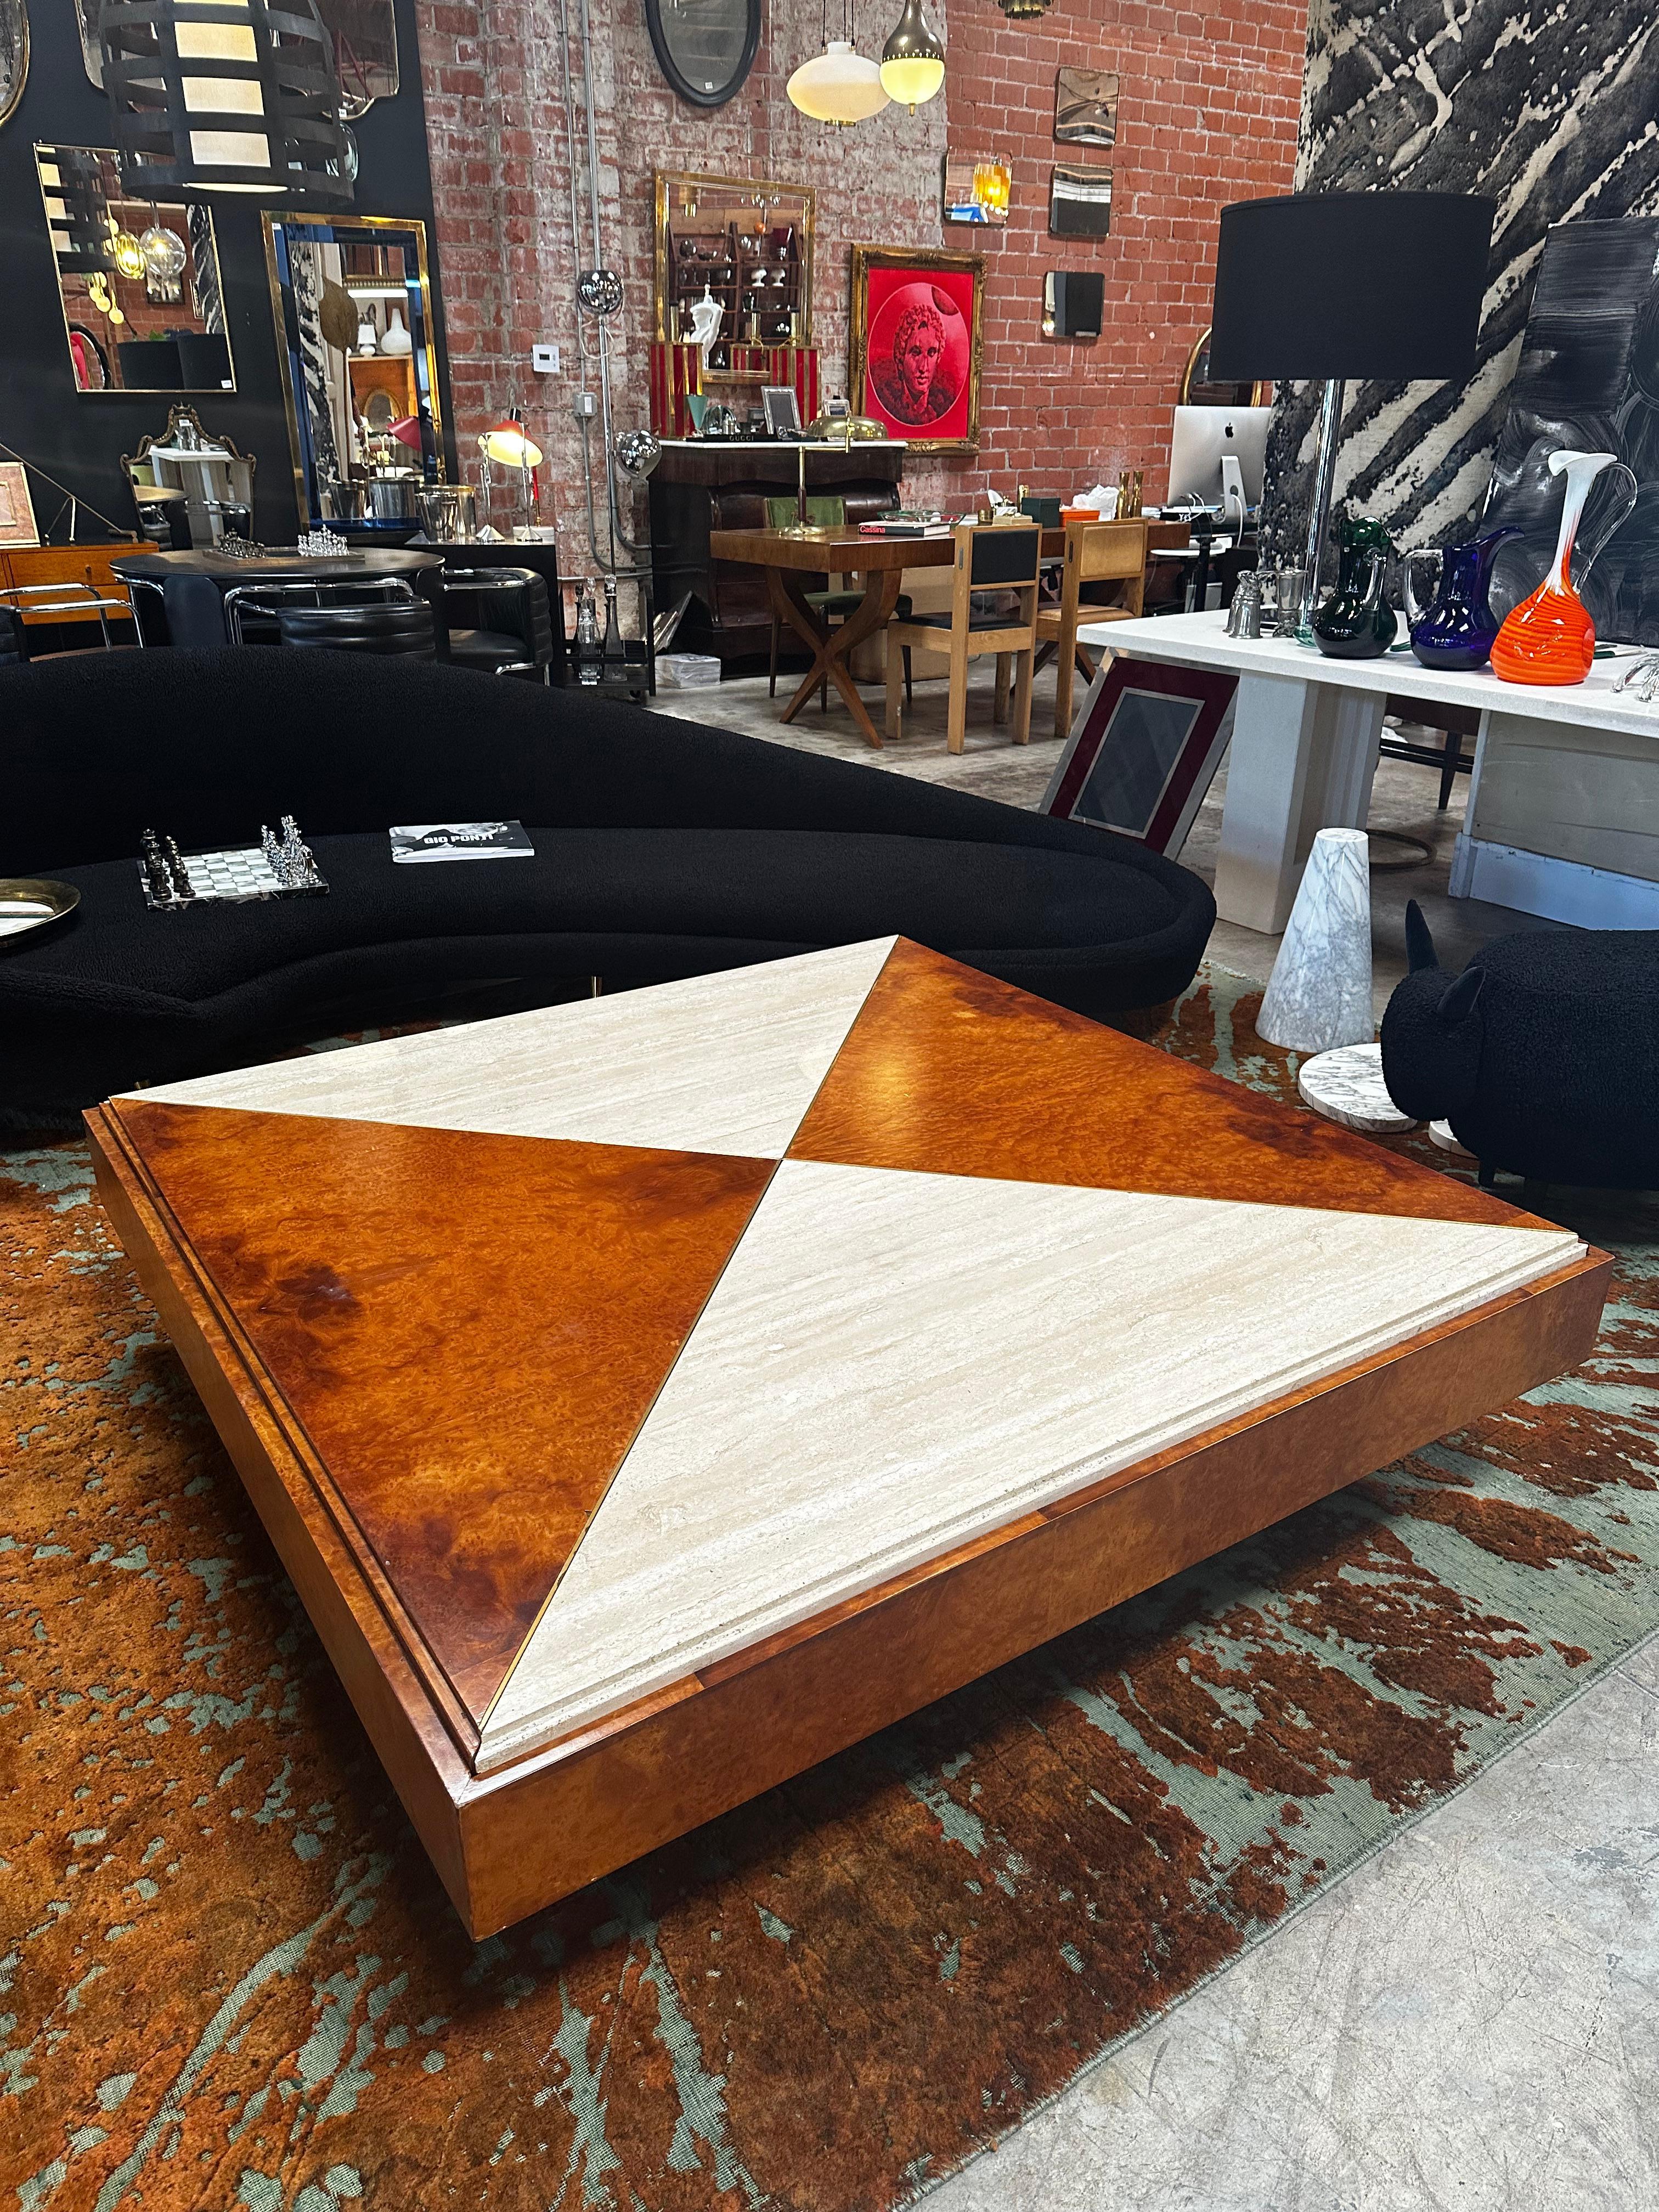 Very elegant oversize Mid-Century Modern coffee table made from marble and wood , the coffee table is in good conditions and is very exclusive since the top part is divided between white marble and wood. Nothing touches, nothing clashes, which gives